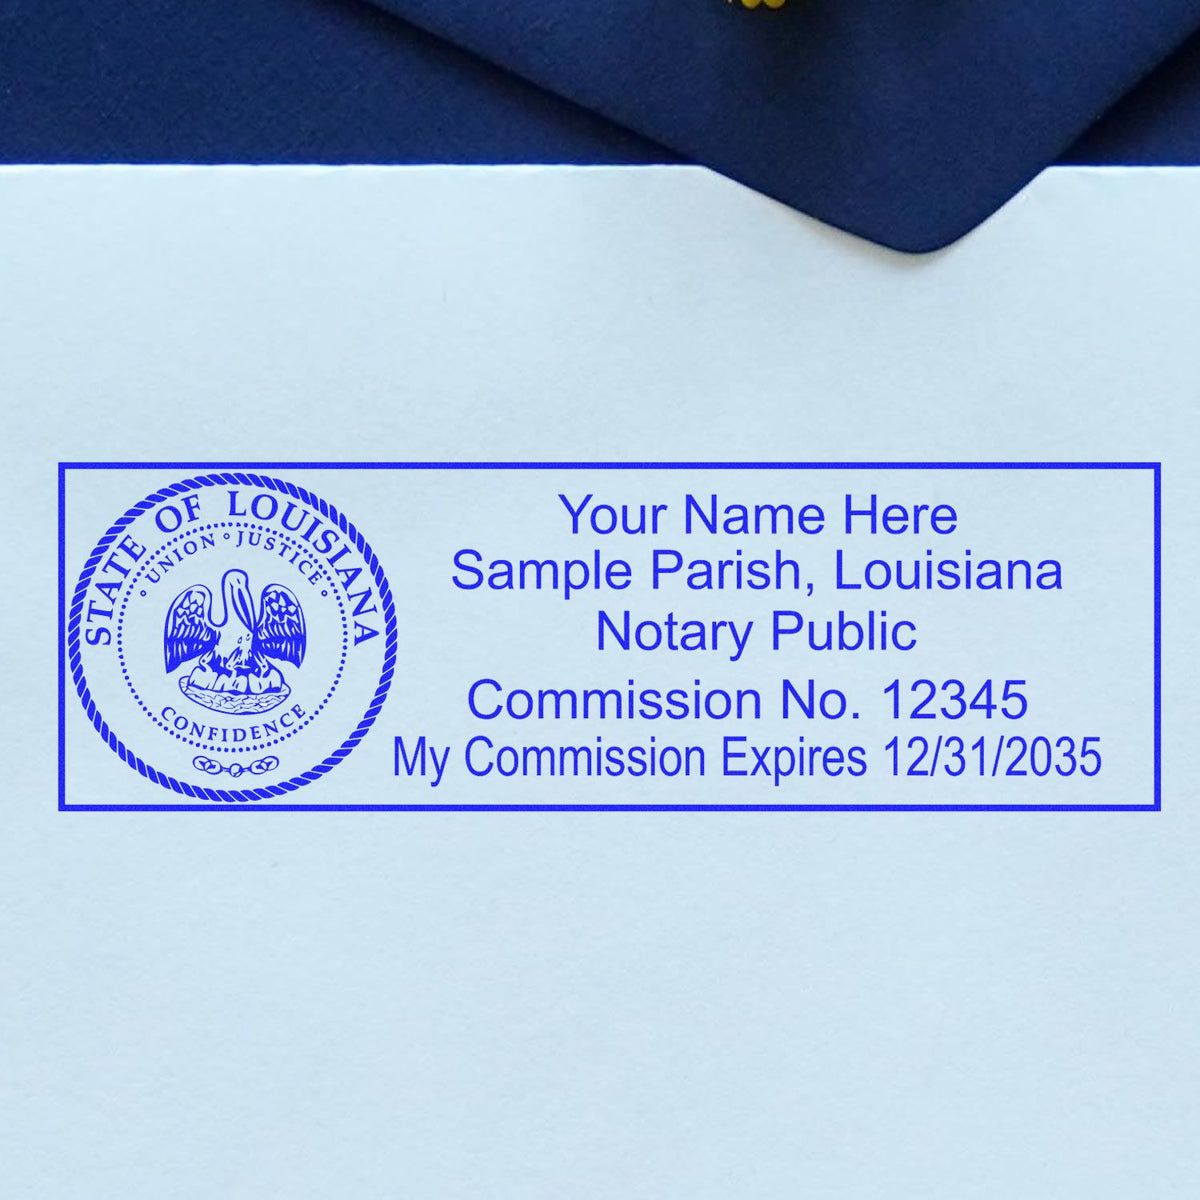 A photograph of the Heavy-Duty Louisiana Rectangular Notary Stamp stamp impression reveals a vivid, professional image of the on paper.